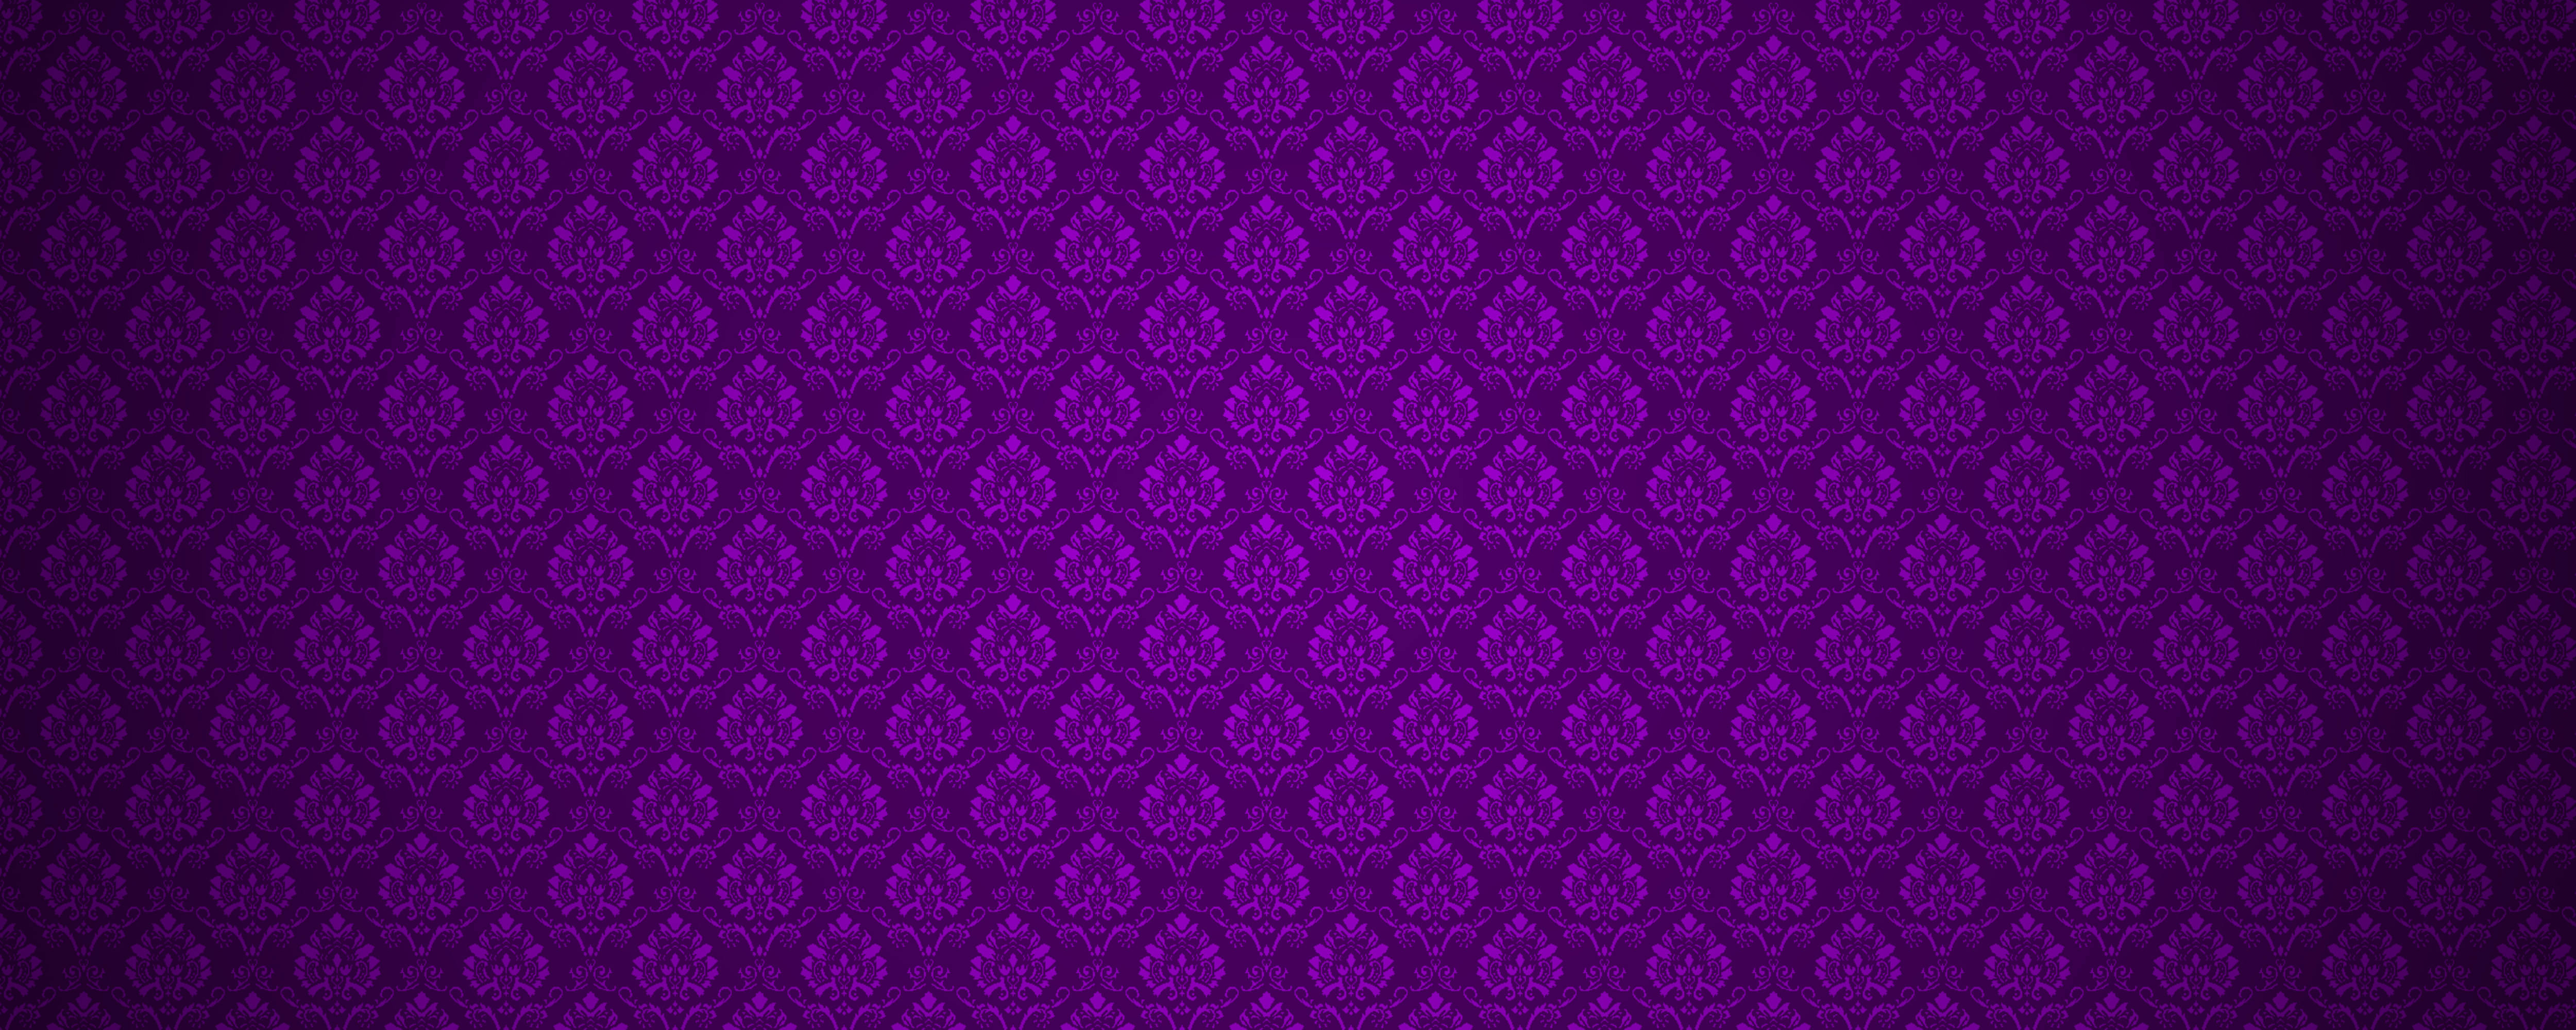 39 High Definition Purple Wallpaper Images for Download 5000x2000